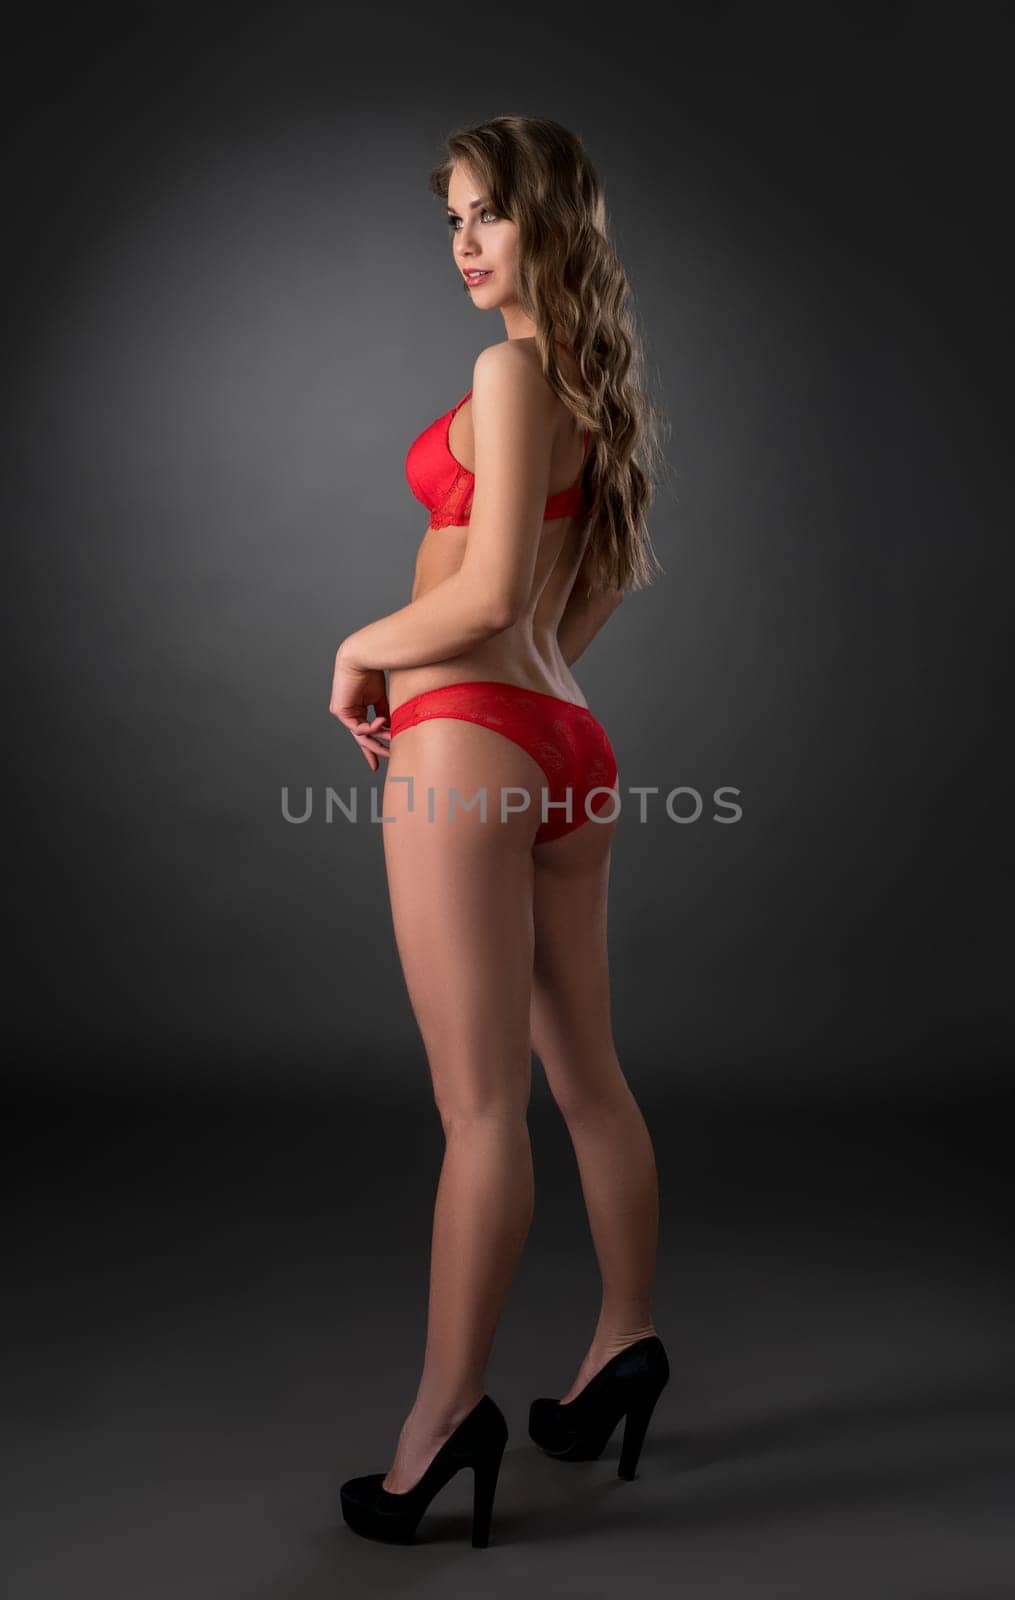 Sexy girl posing in red lingerie and high-heeled shoes